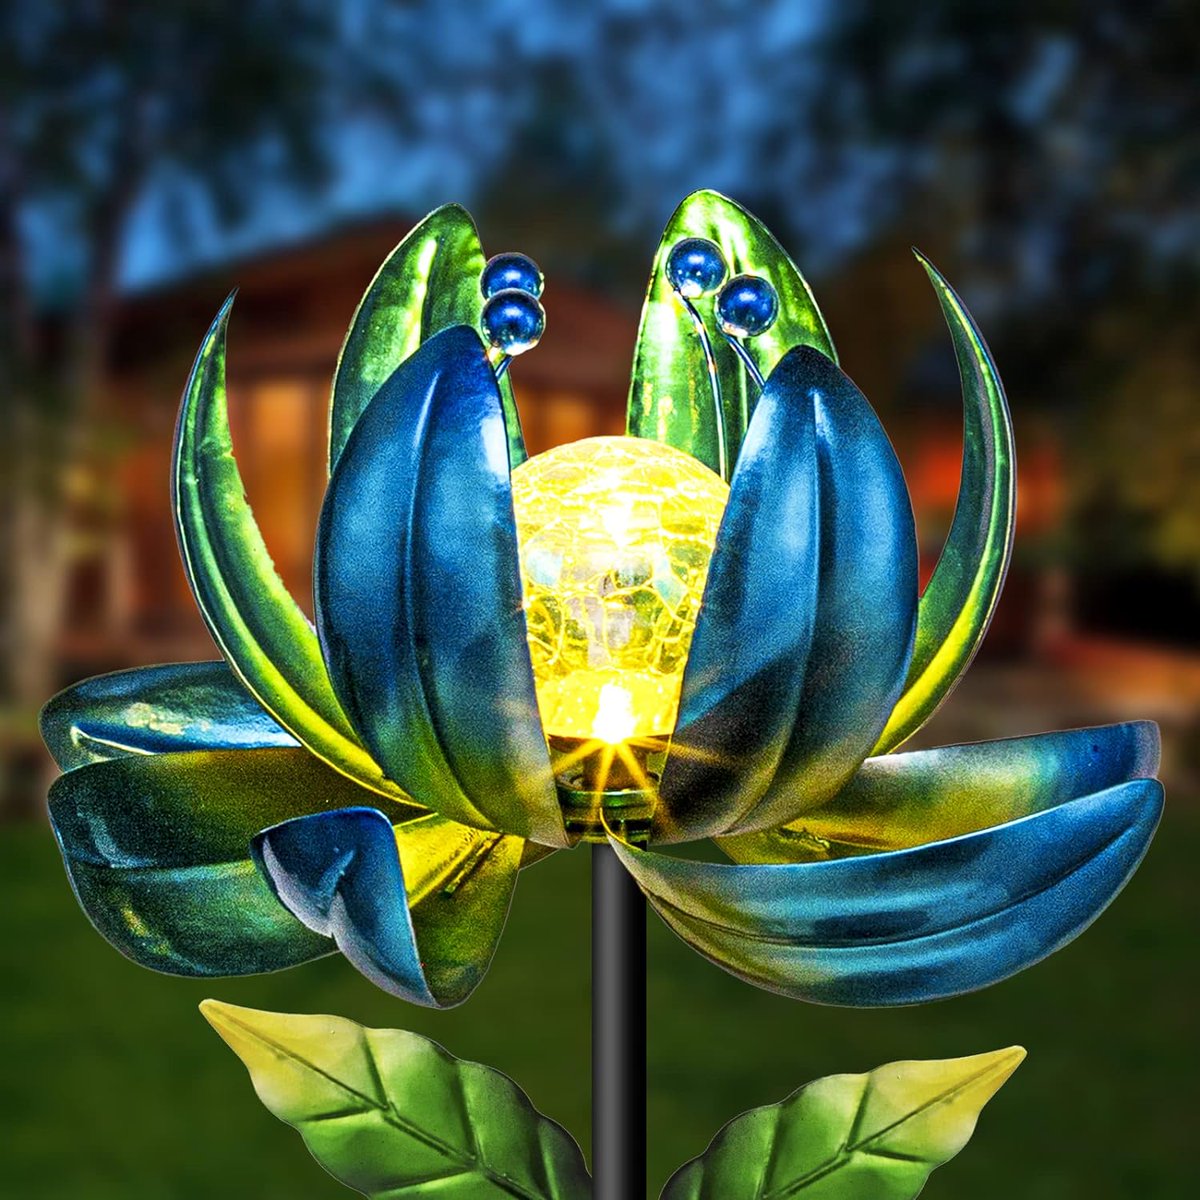 Huaxu Solar Outdoor Lights 35.4In Garden Decor Flower Wind Spinners, Waterproof LED Crackle Glass Globe Fairy Art Metal Stake for Lawn Patio Pathway Yard Porch Driveway Summer Decorations Gift(Blue) shopstyle.it/l/cbhyu